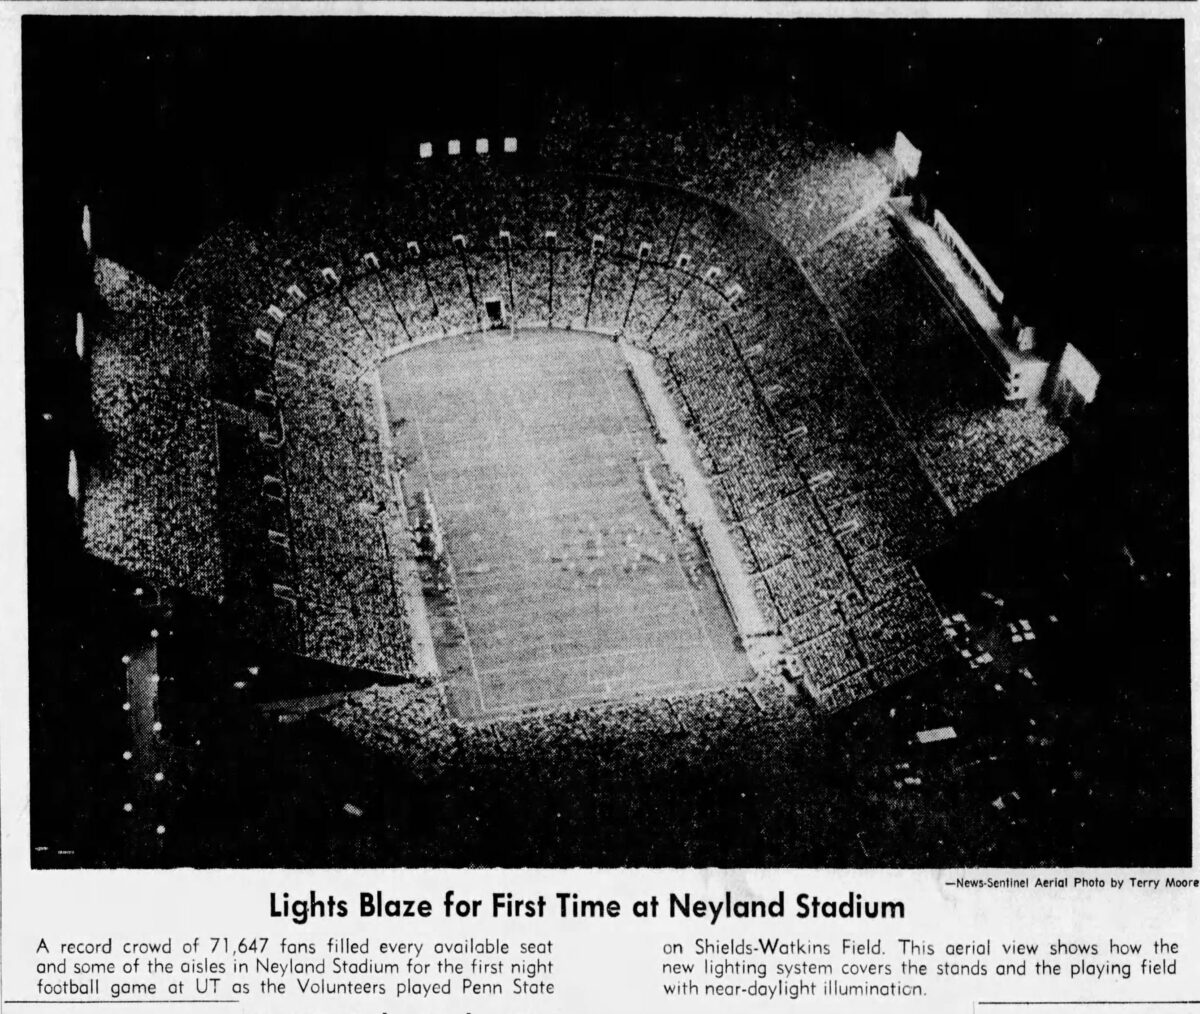 50th anniversary: A look at Neyland Stadium’s first night game